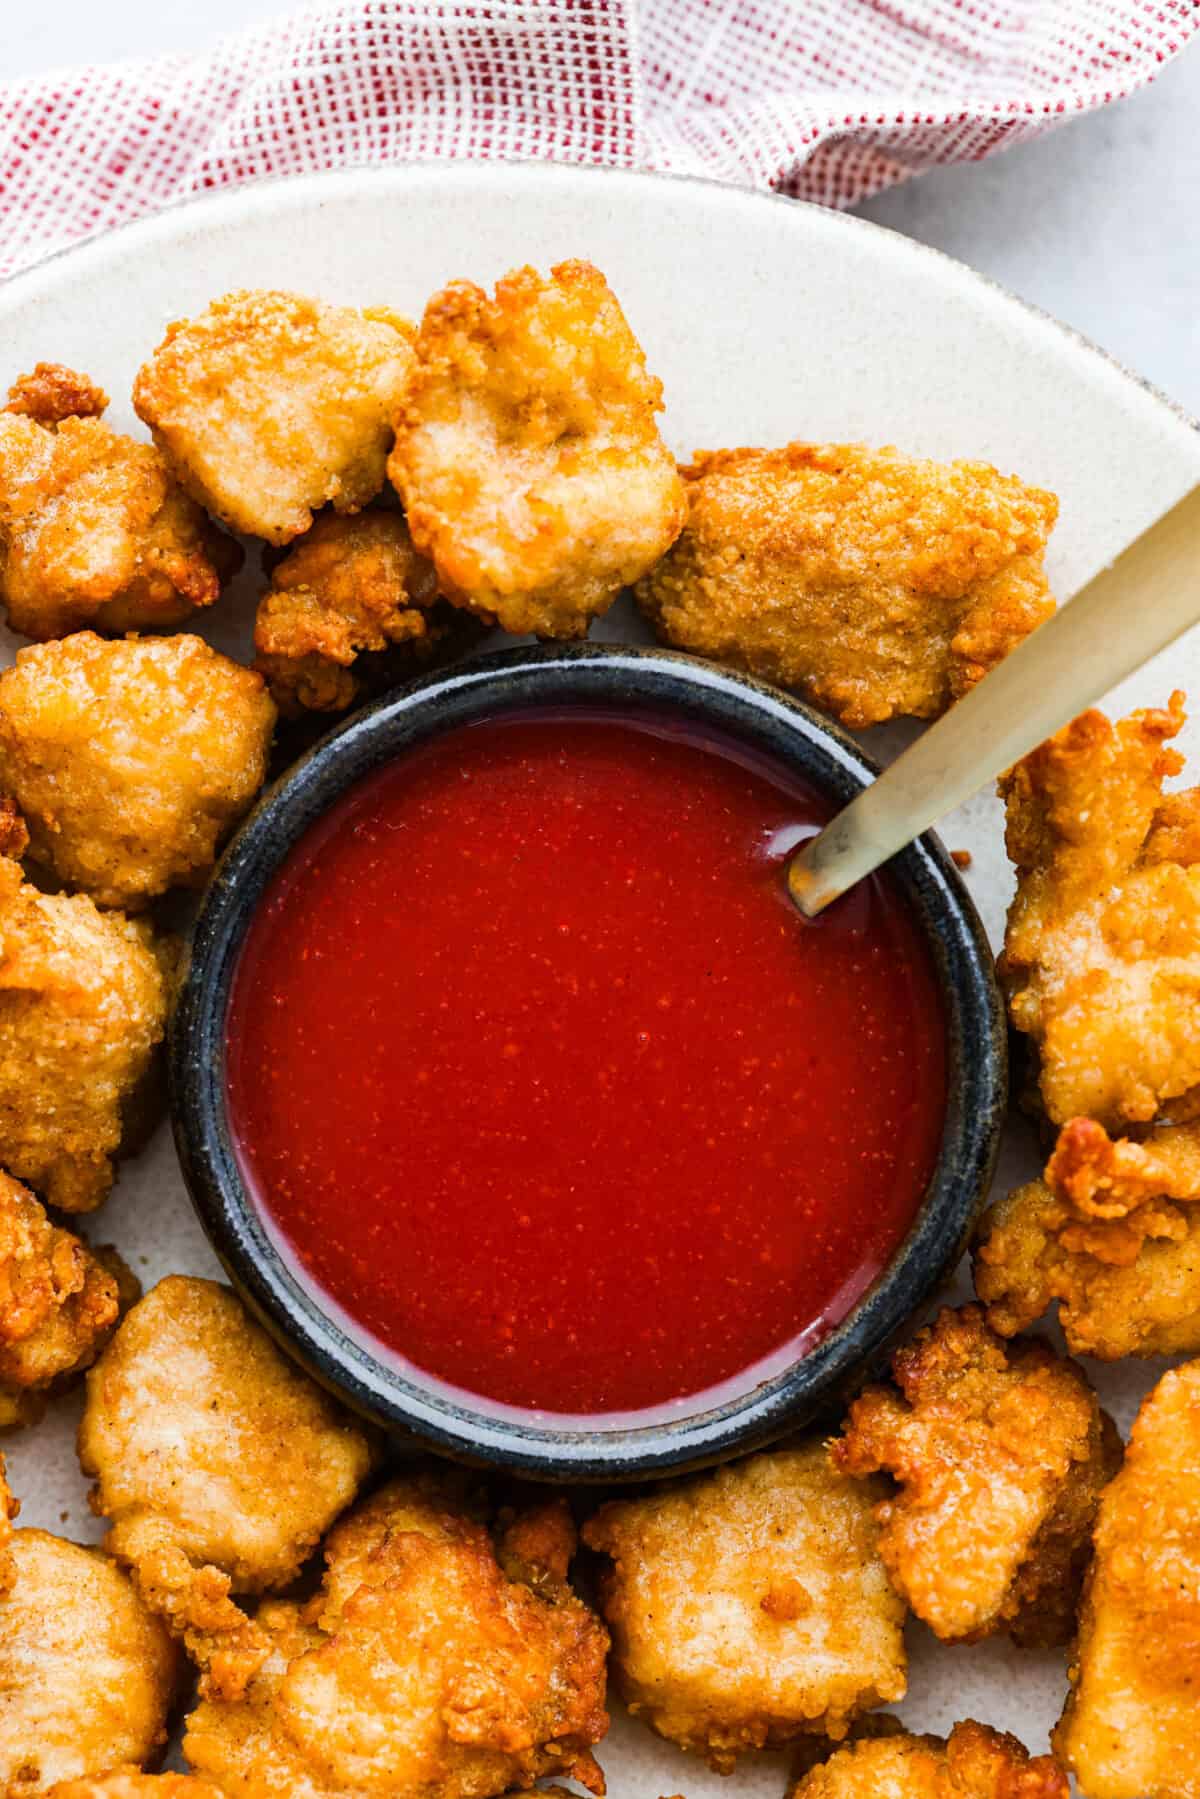 A bowl of polynesian sauce surrounded by chicken nuggets.